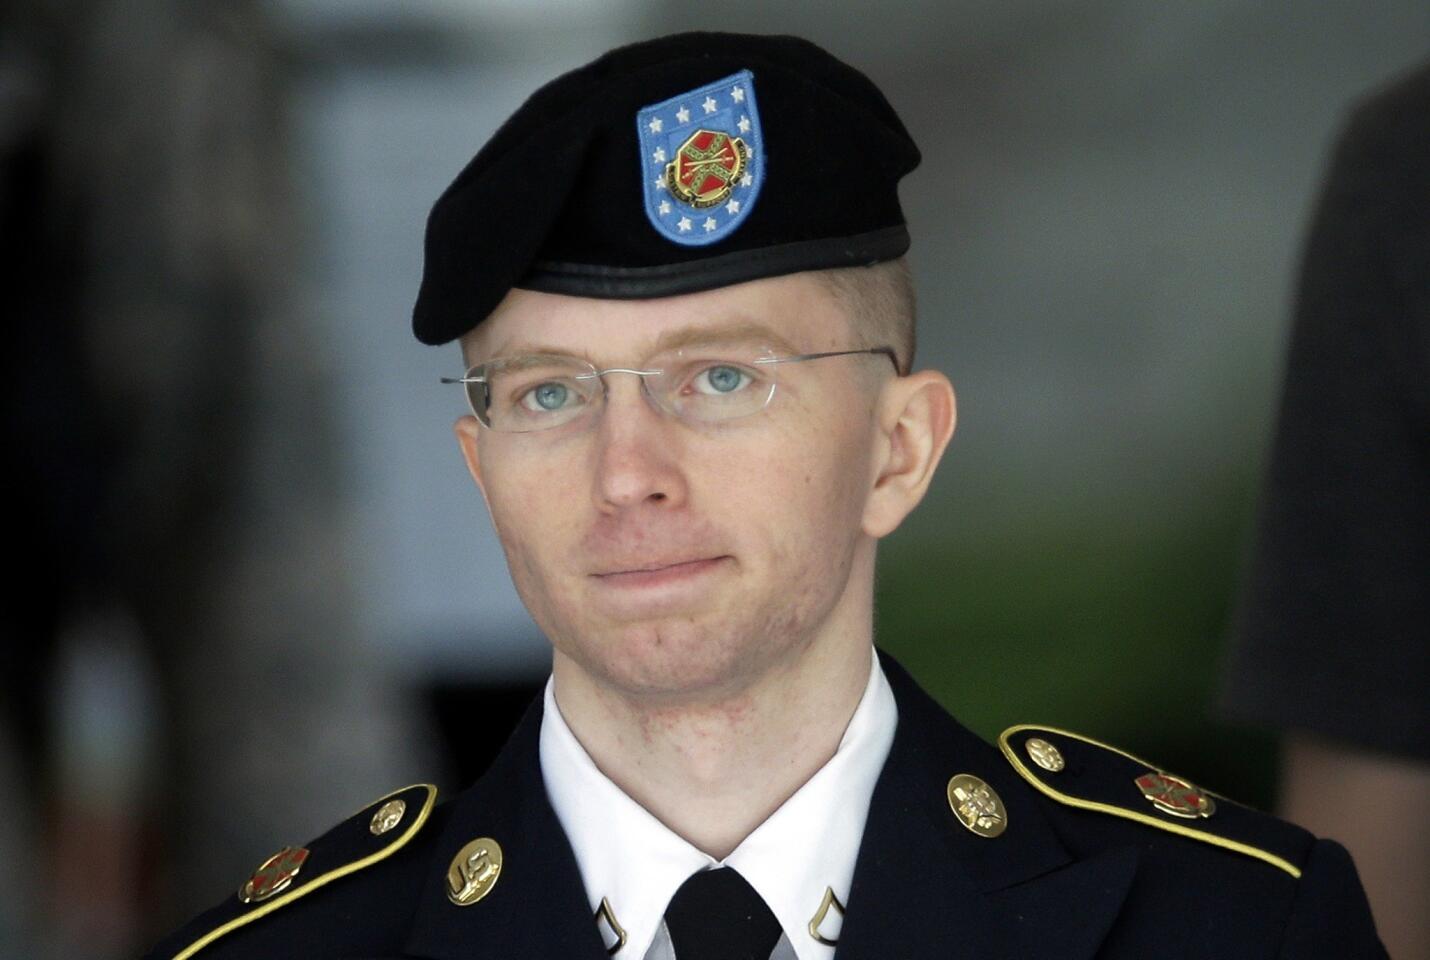 U.S. Army Pvt. Bradley Manning gave a trove of classified military and diplomatic material to WikiLeaks. After a court-martial, Manning was sentenced to 35 years in prison, after facing the possibility of up to 90 years behind bars. He will be eligible for parole in less than seven years. After his sentencing, Manning said plans to live as a woman named Chelsea and wanted to begin hormone therapy.